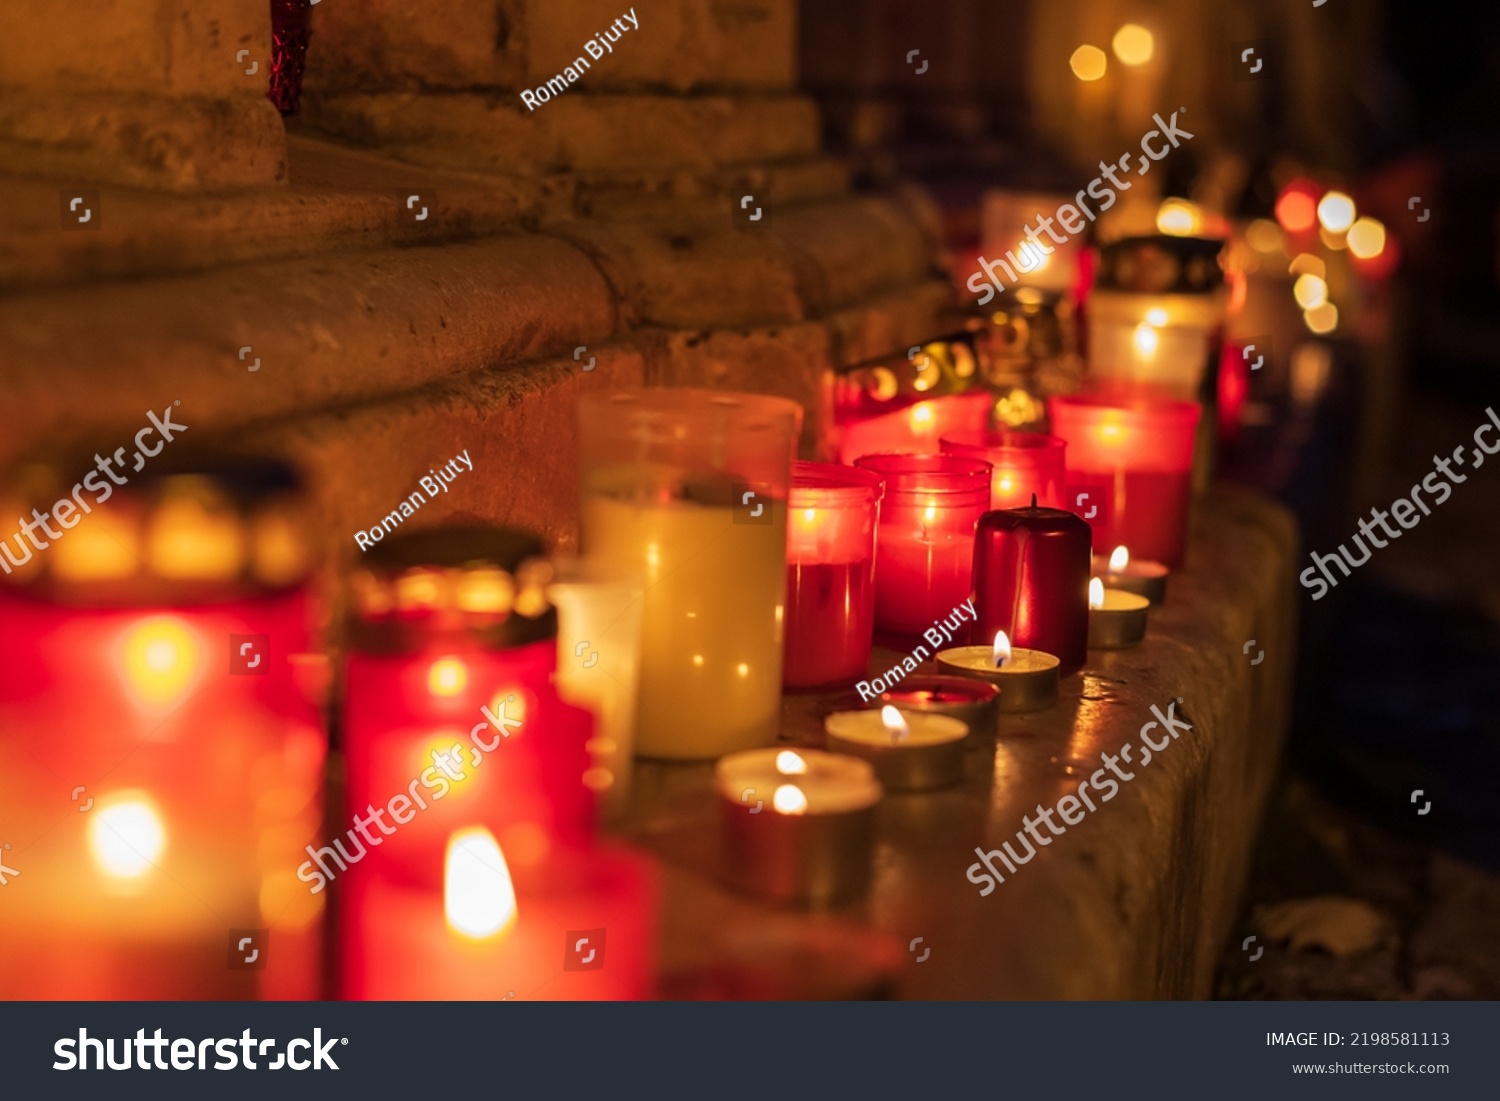 A place of worship where candles are lit. #2198581113